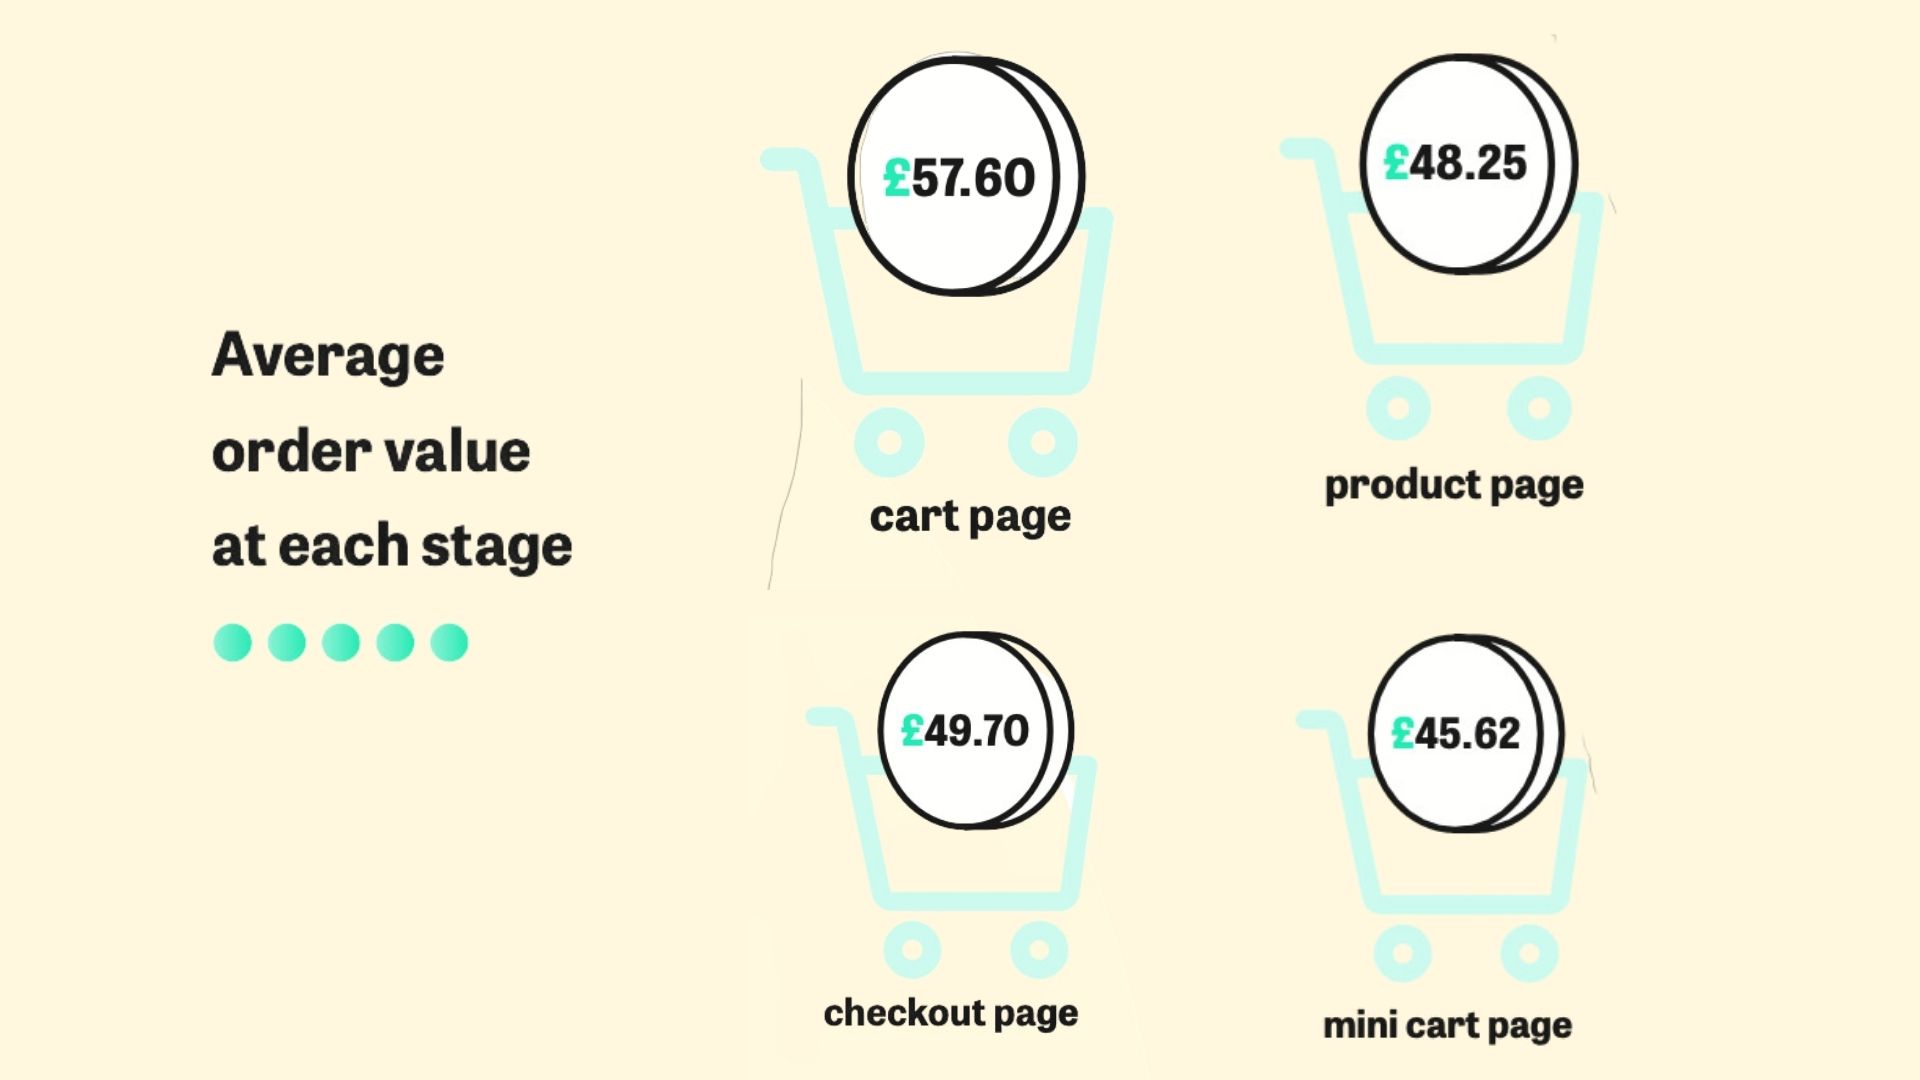 Average order value at different stages of checkout